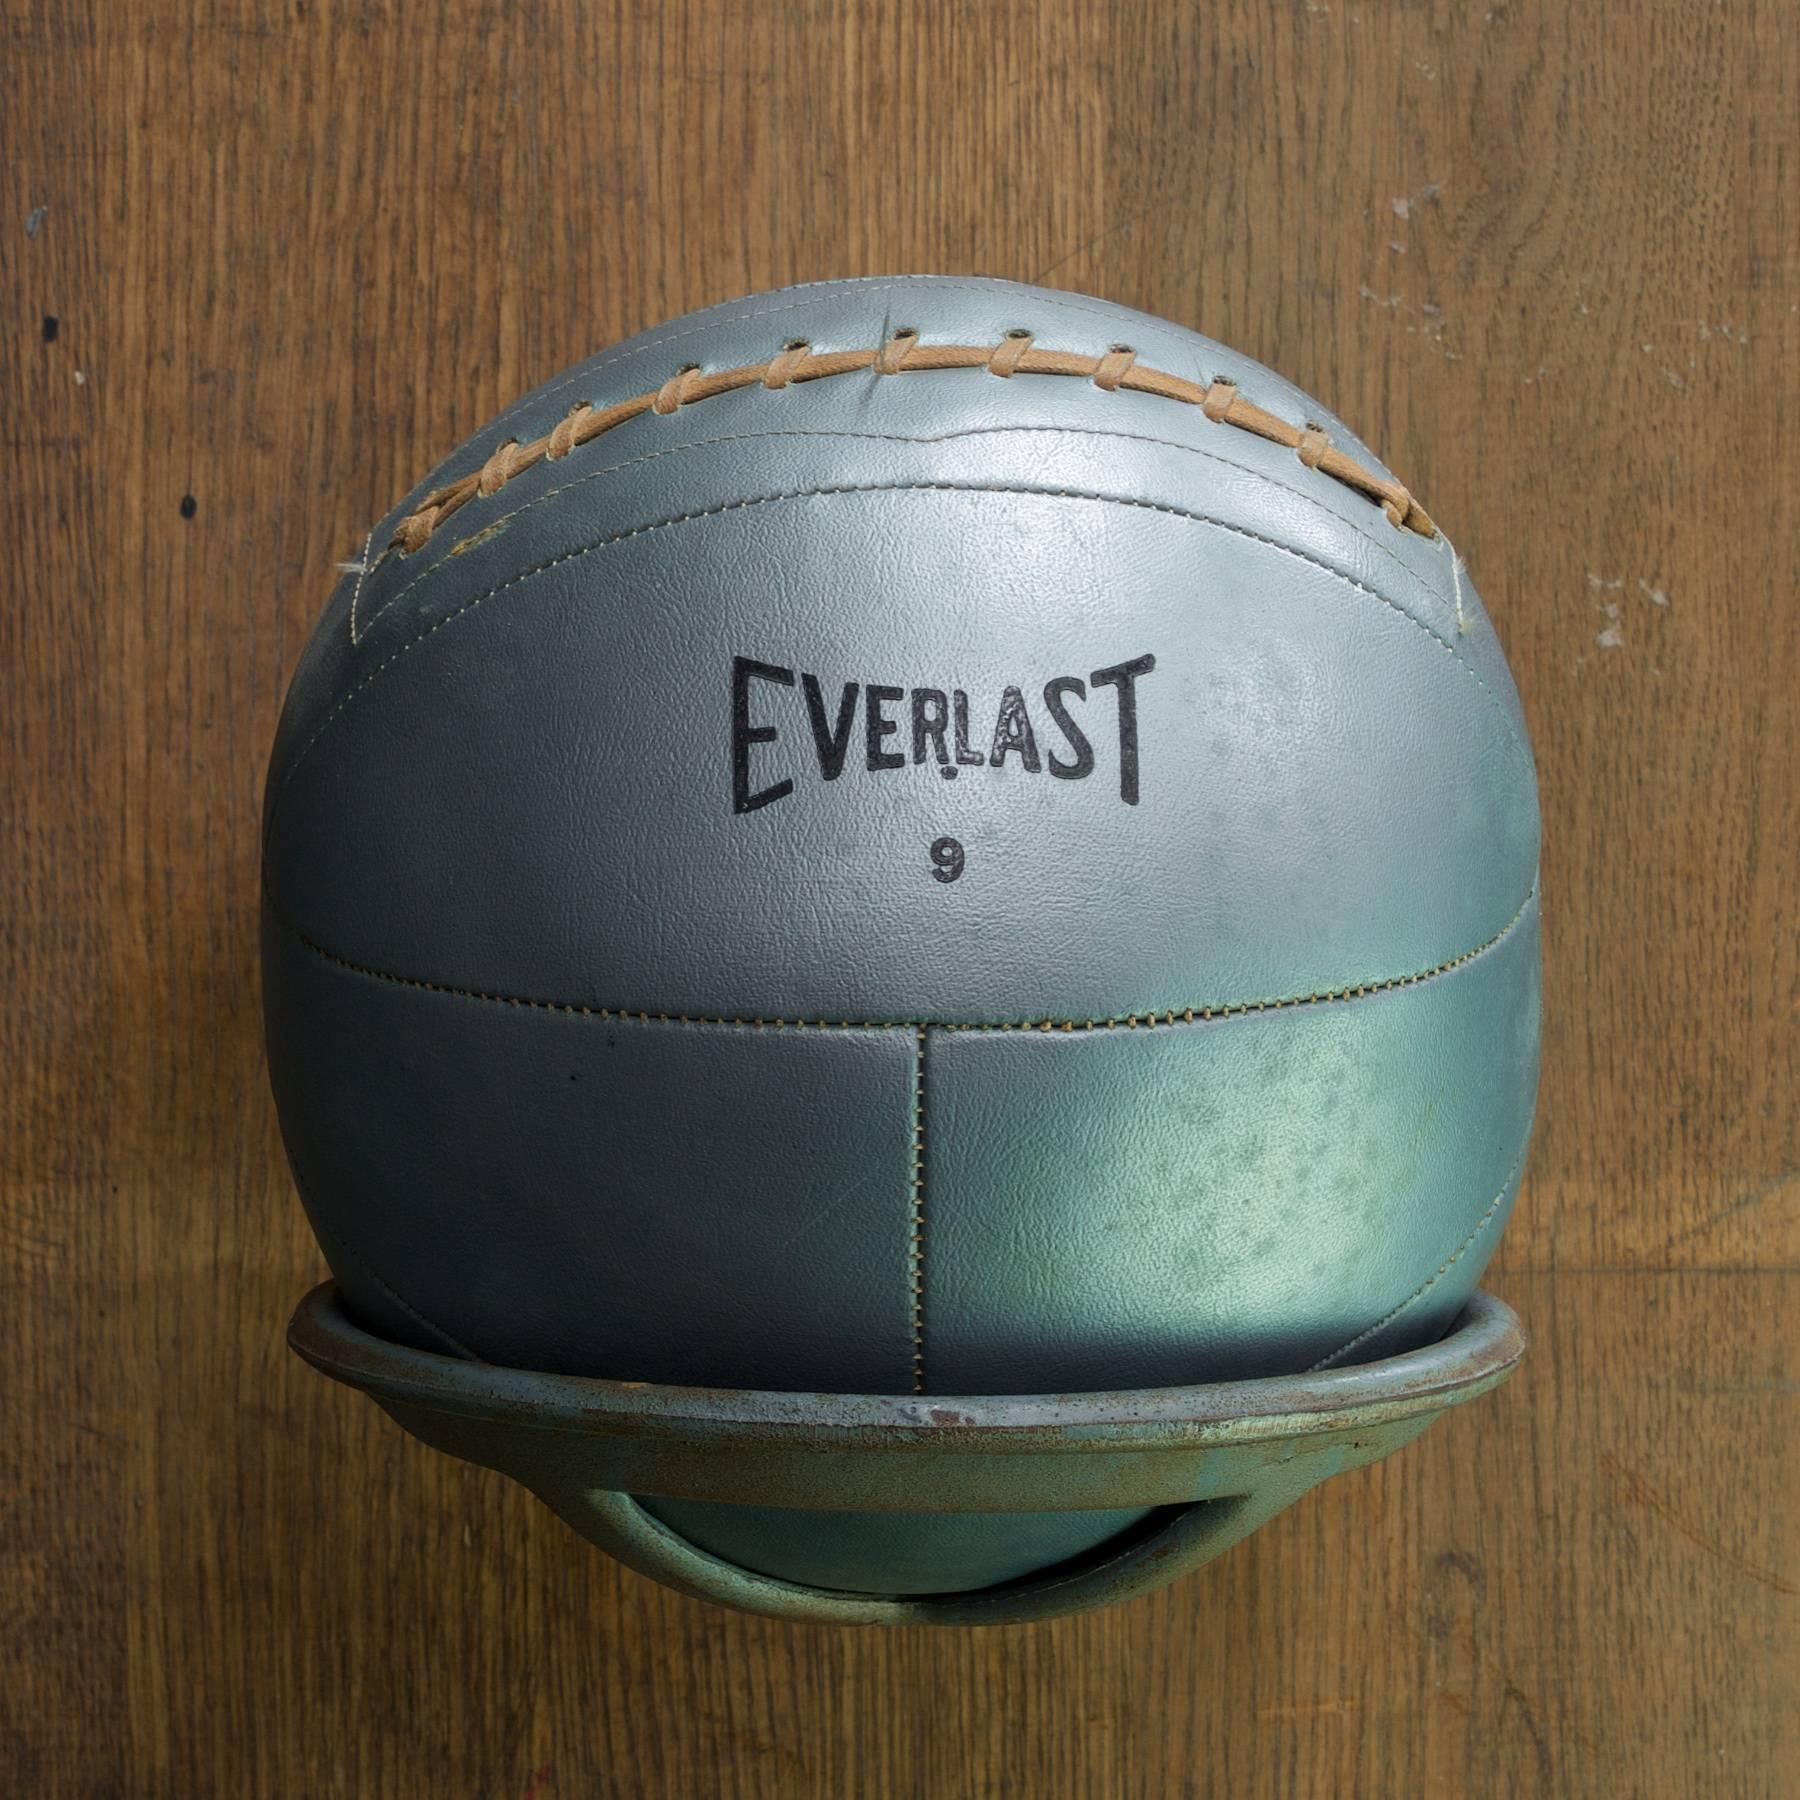 Vintage Everlast ball no.9. about 14 lbs. It does not appear to have been opened and restitched. Blueish-grey in color with black print. Dimensions: 9.5 in. (Add 3 in. for Mount.).

 